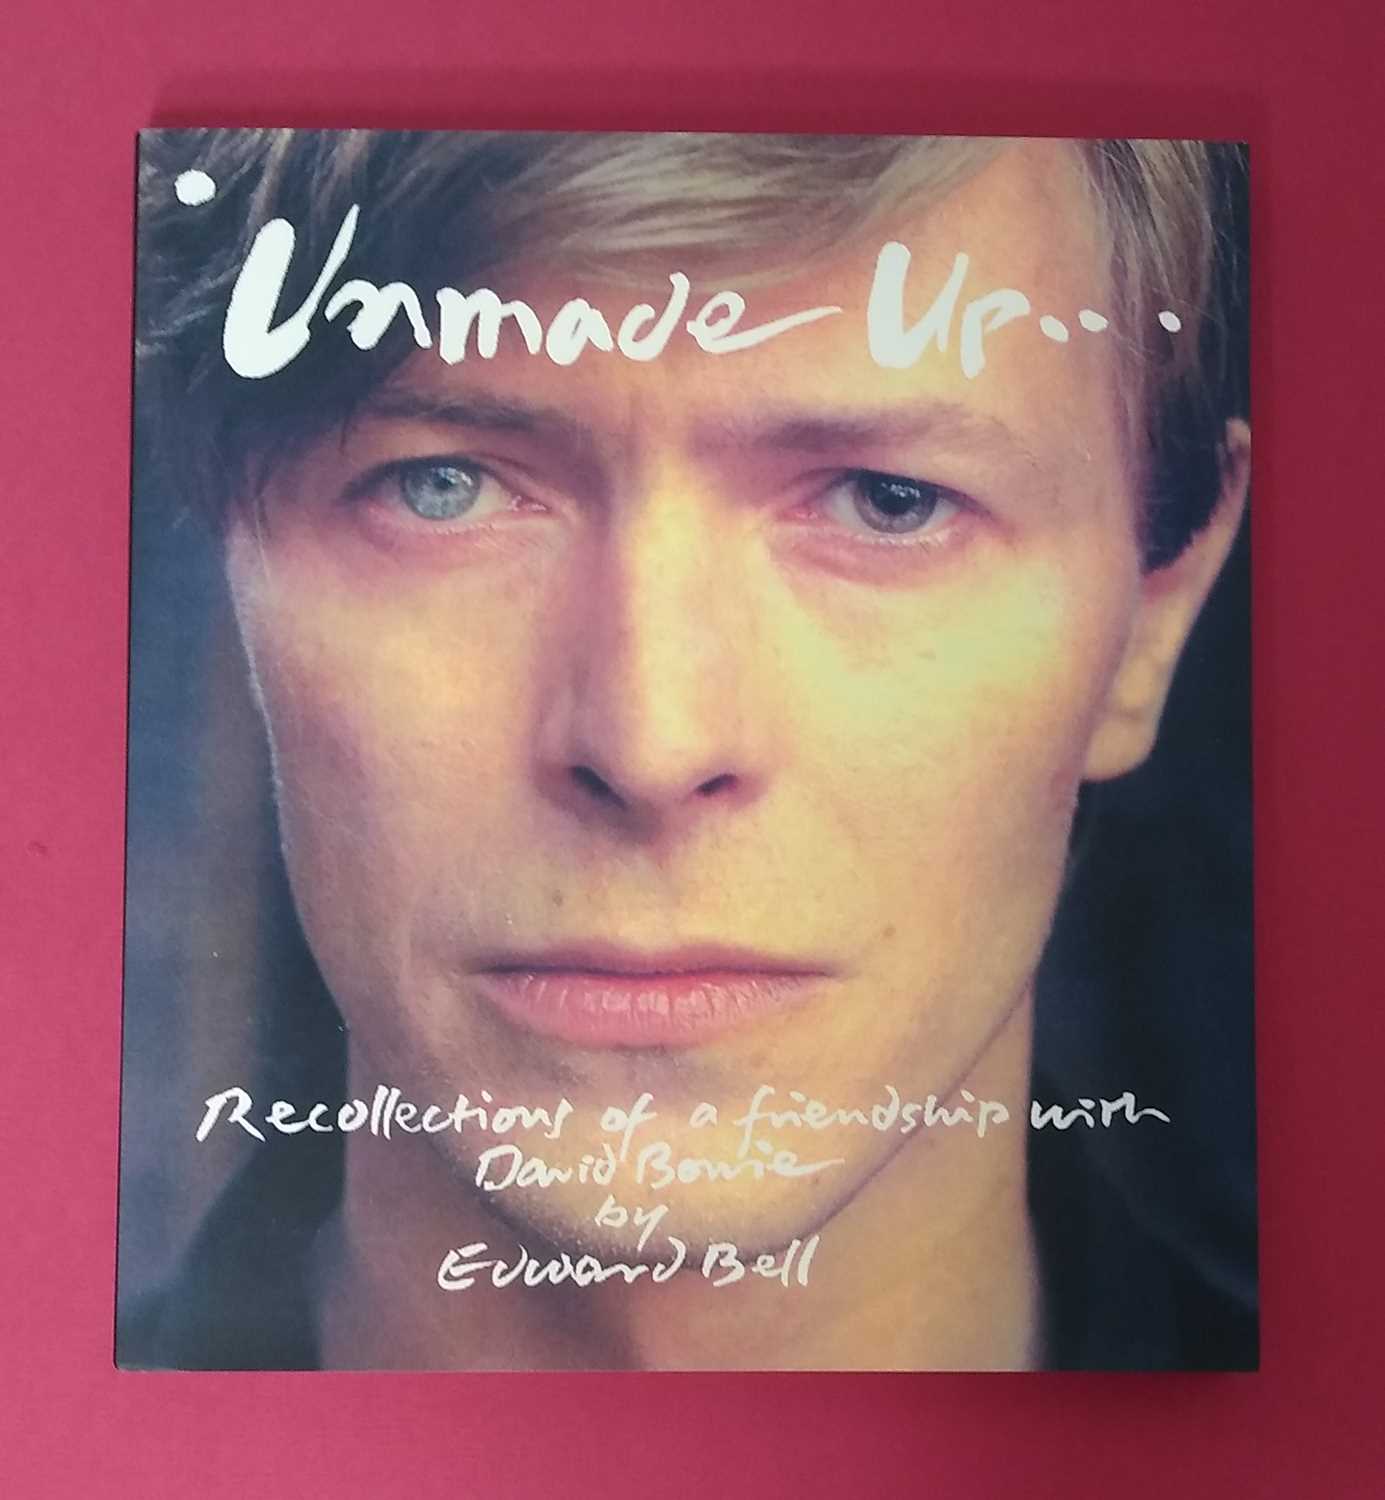 Lot 120 - Edward Bell, 2017, Unmade Up...Recollections of a Friendship with David Bowie